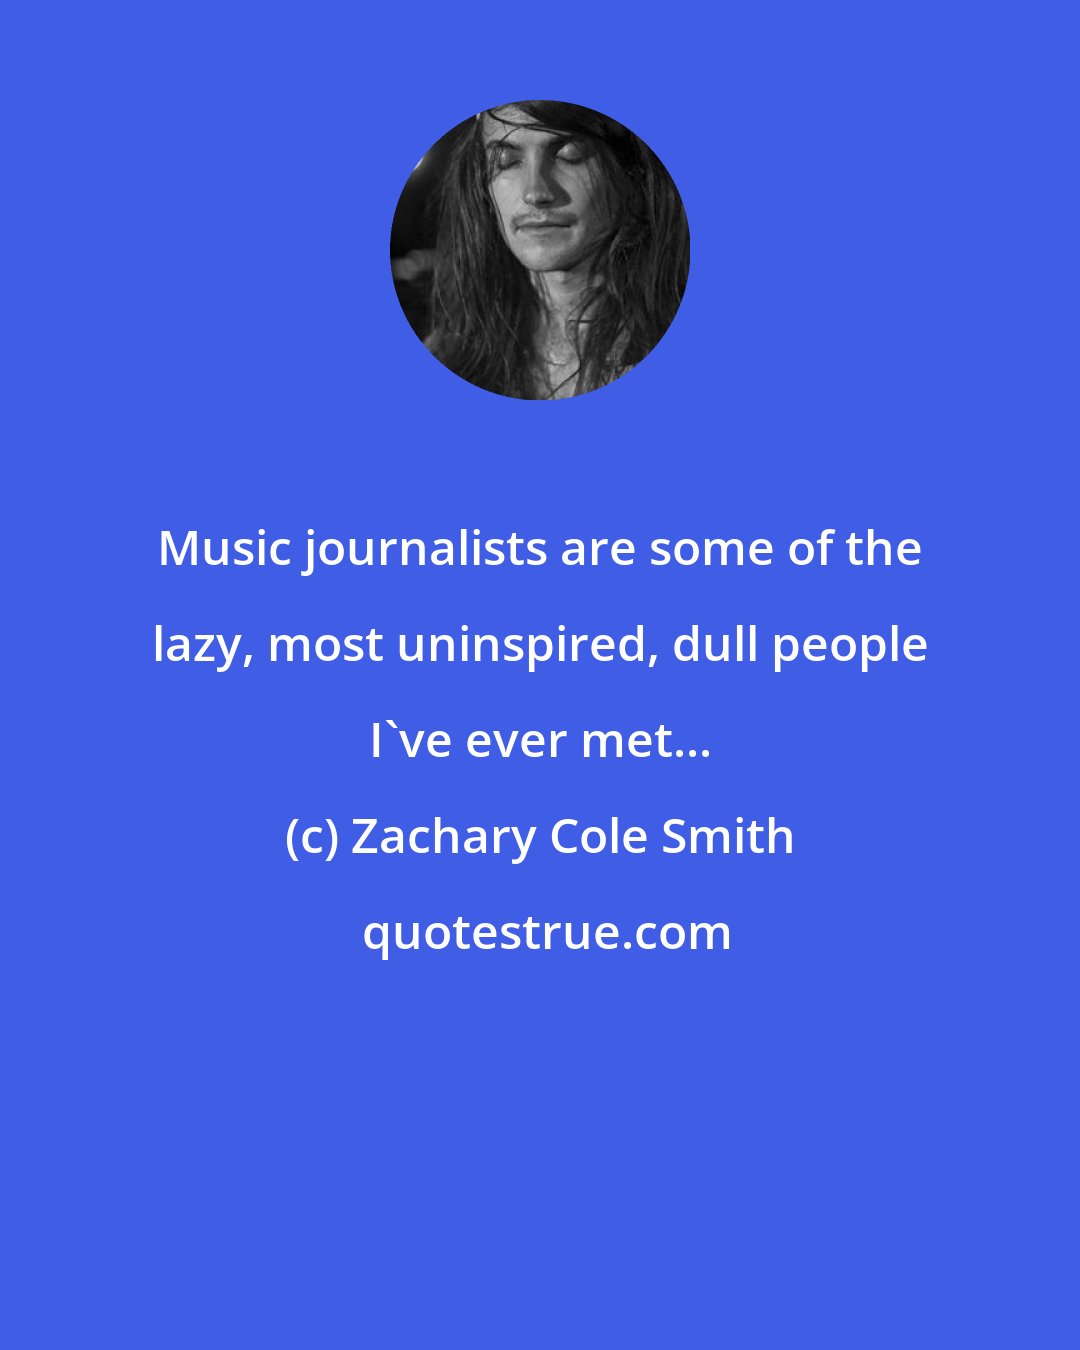 Zachary Cole Smith: Music journalists are some of the lazy, most uninspired, dull people I've ever met...